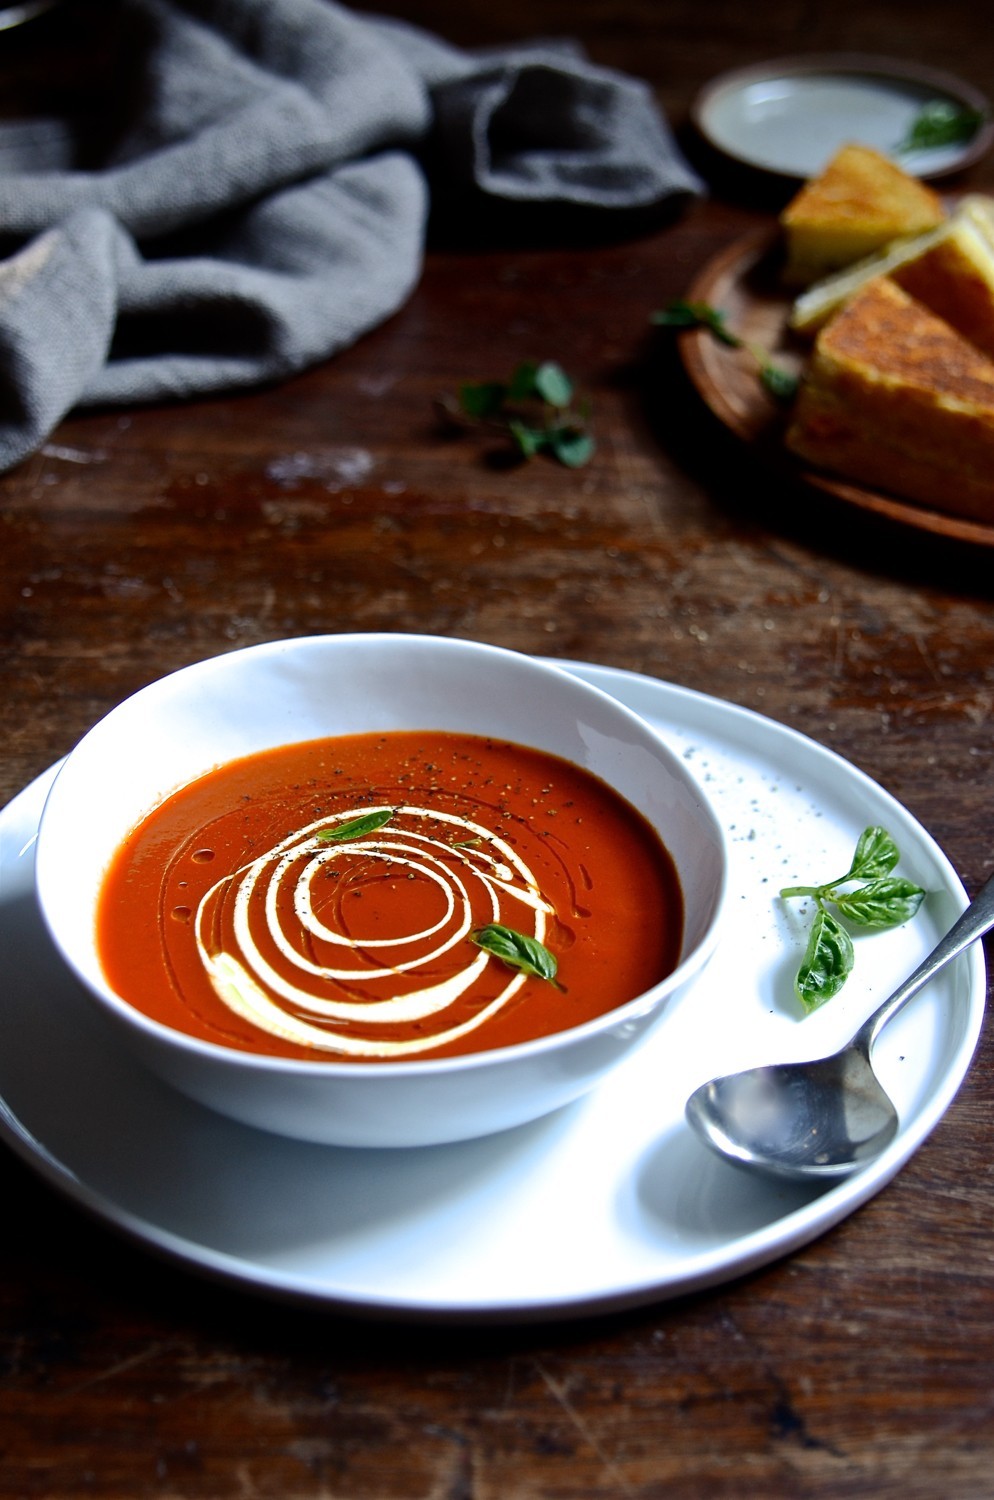 A simple sundried tomato soup